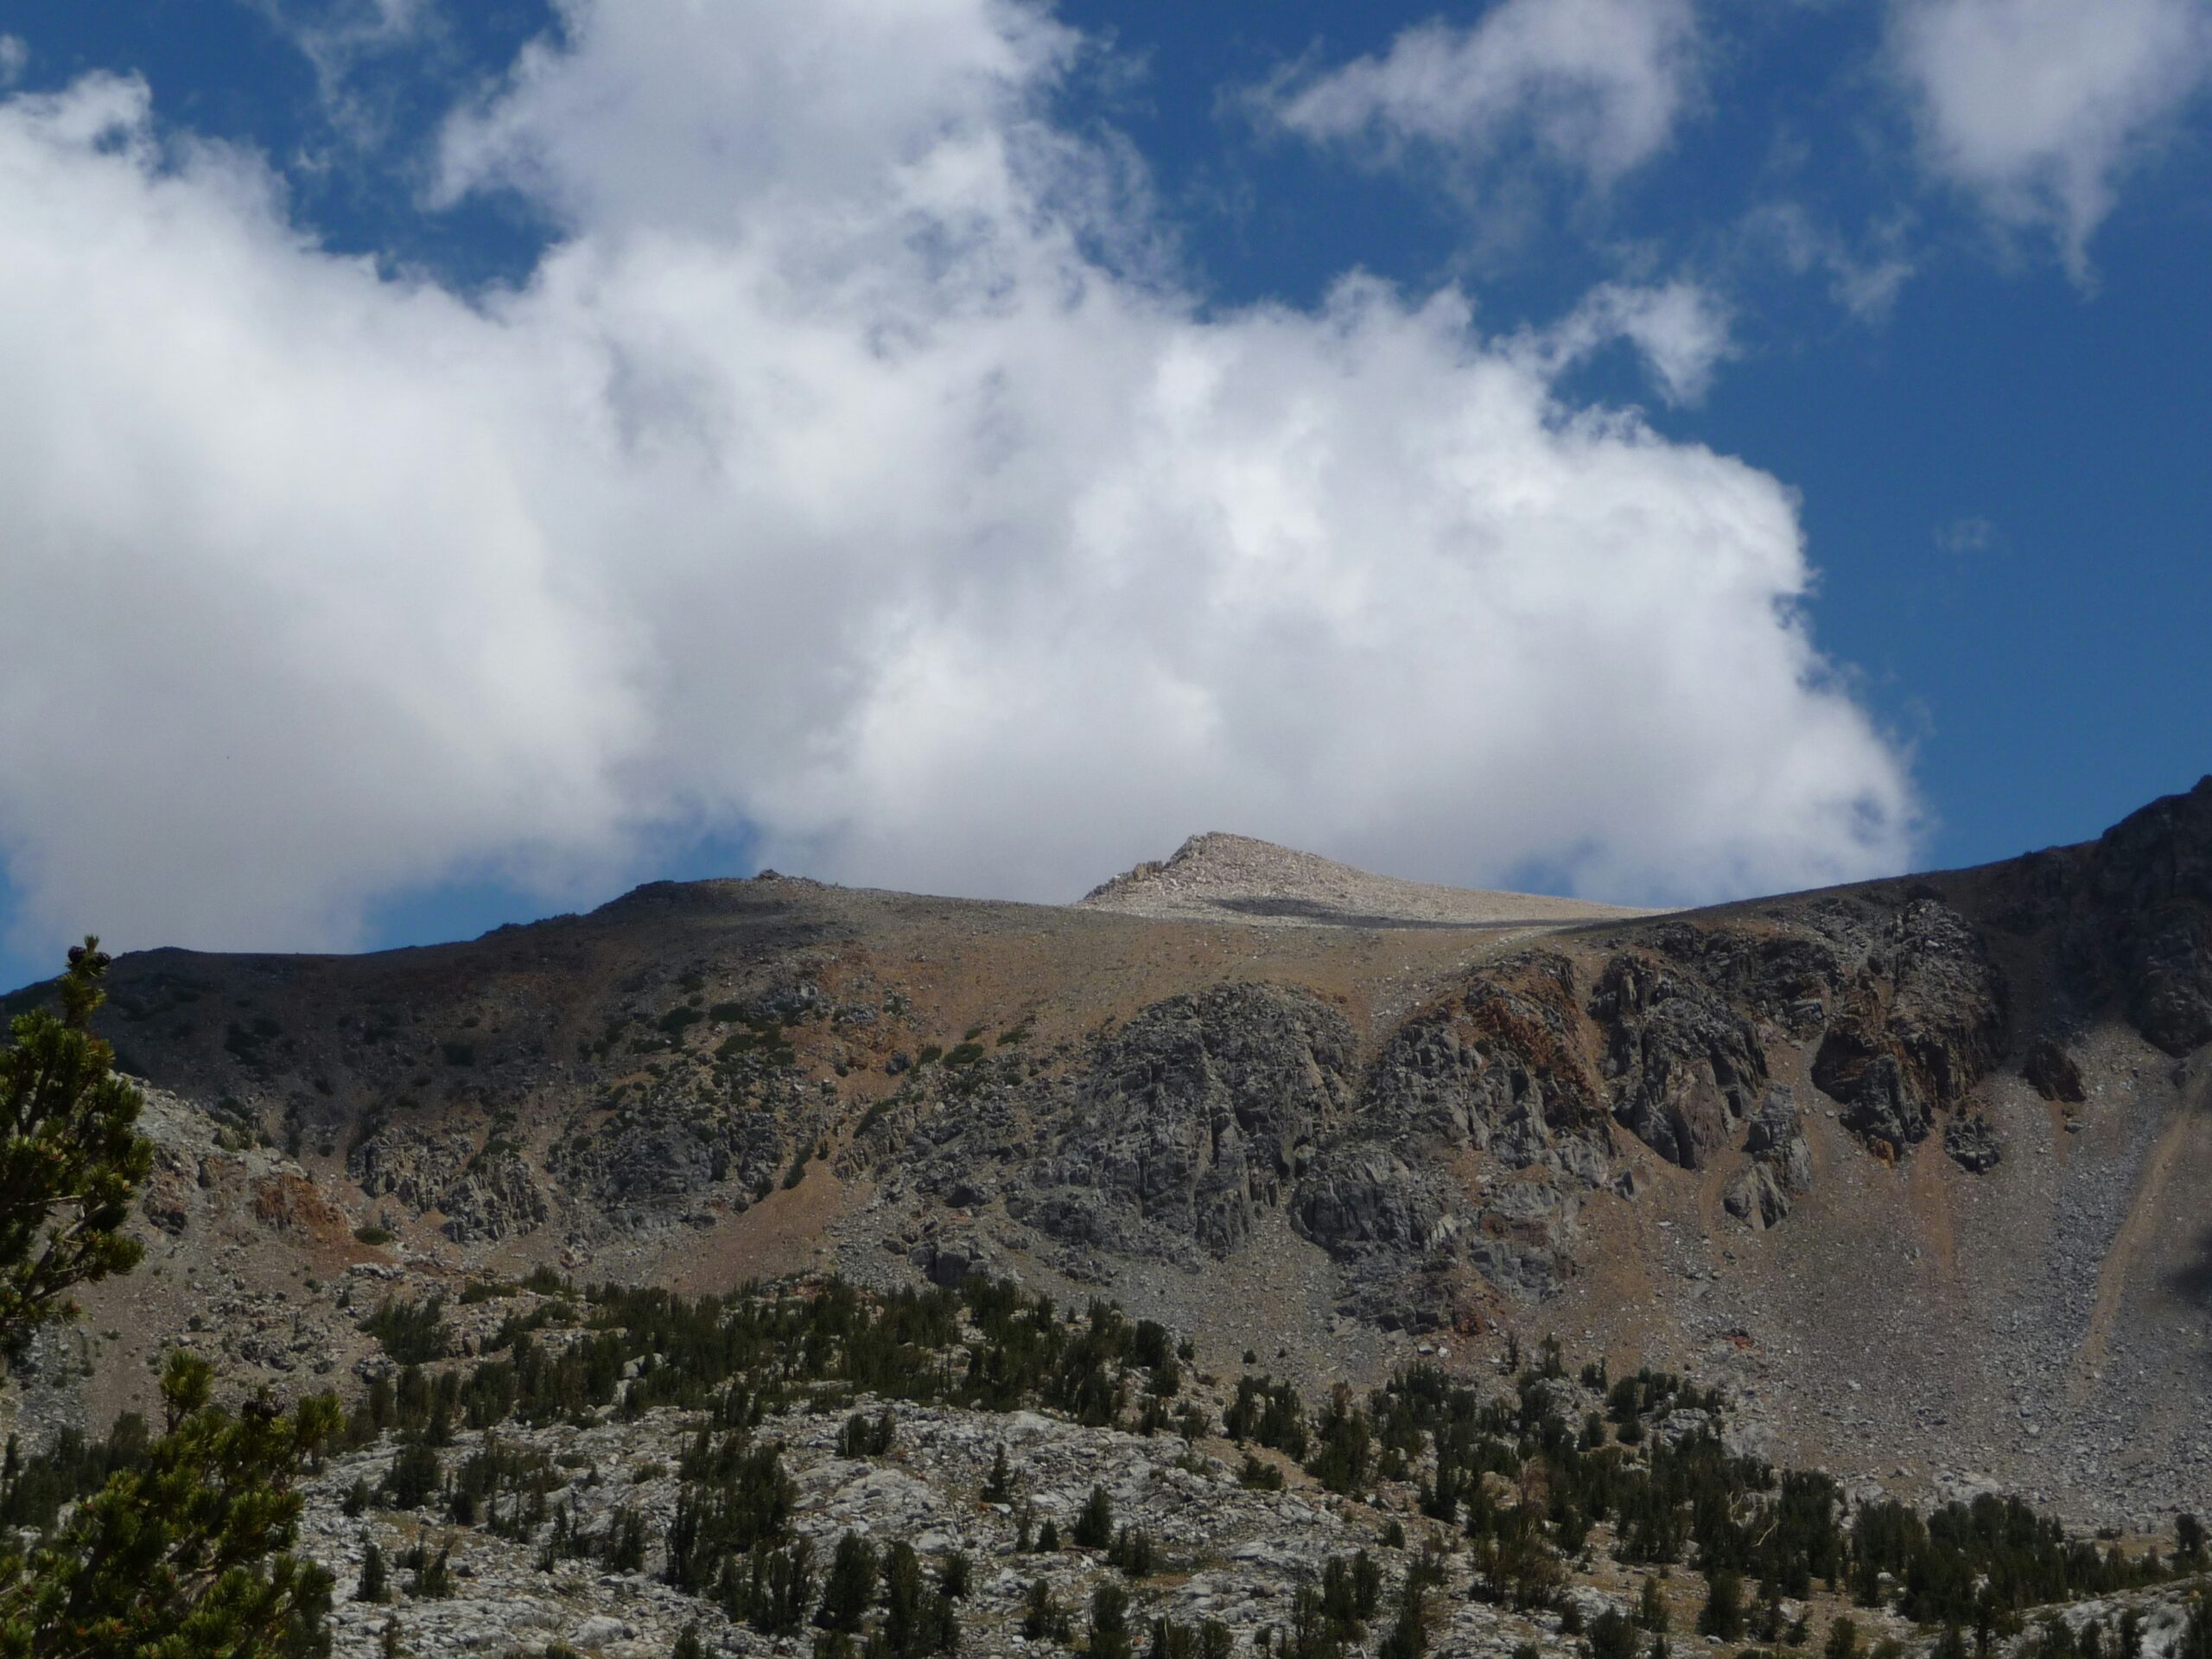 Is It Recommended To Hire A Guide For Climbing Mount Shasta?